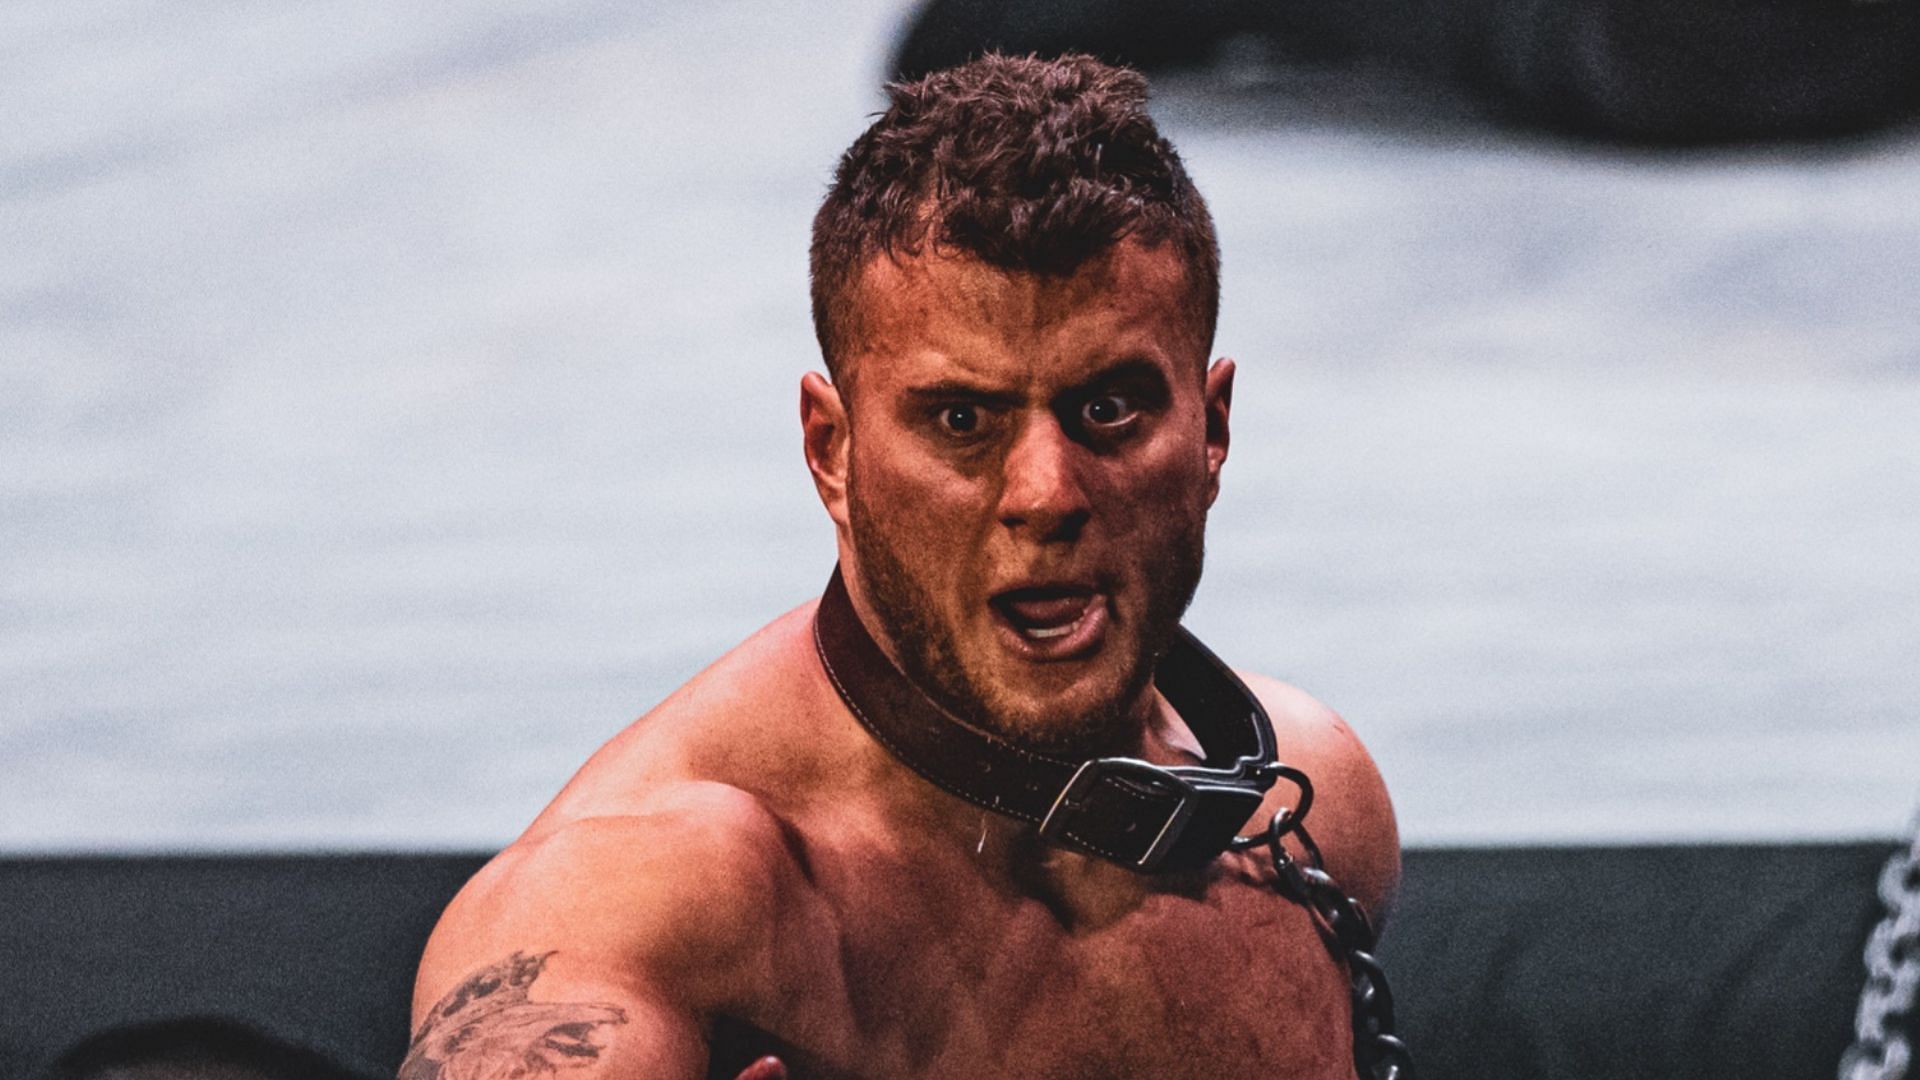 An AEW star has revealed their favorite MJF moment